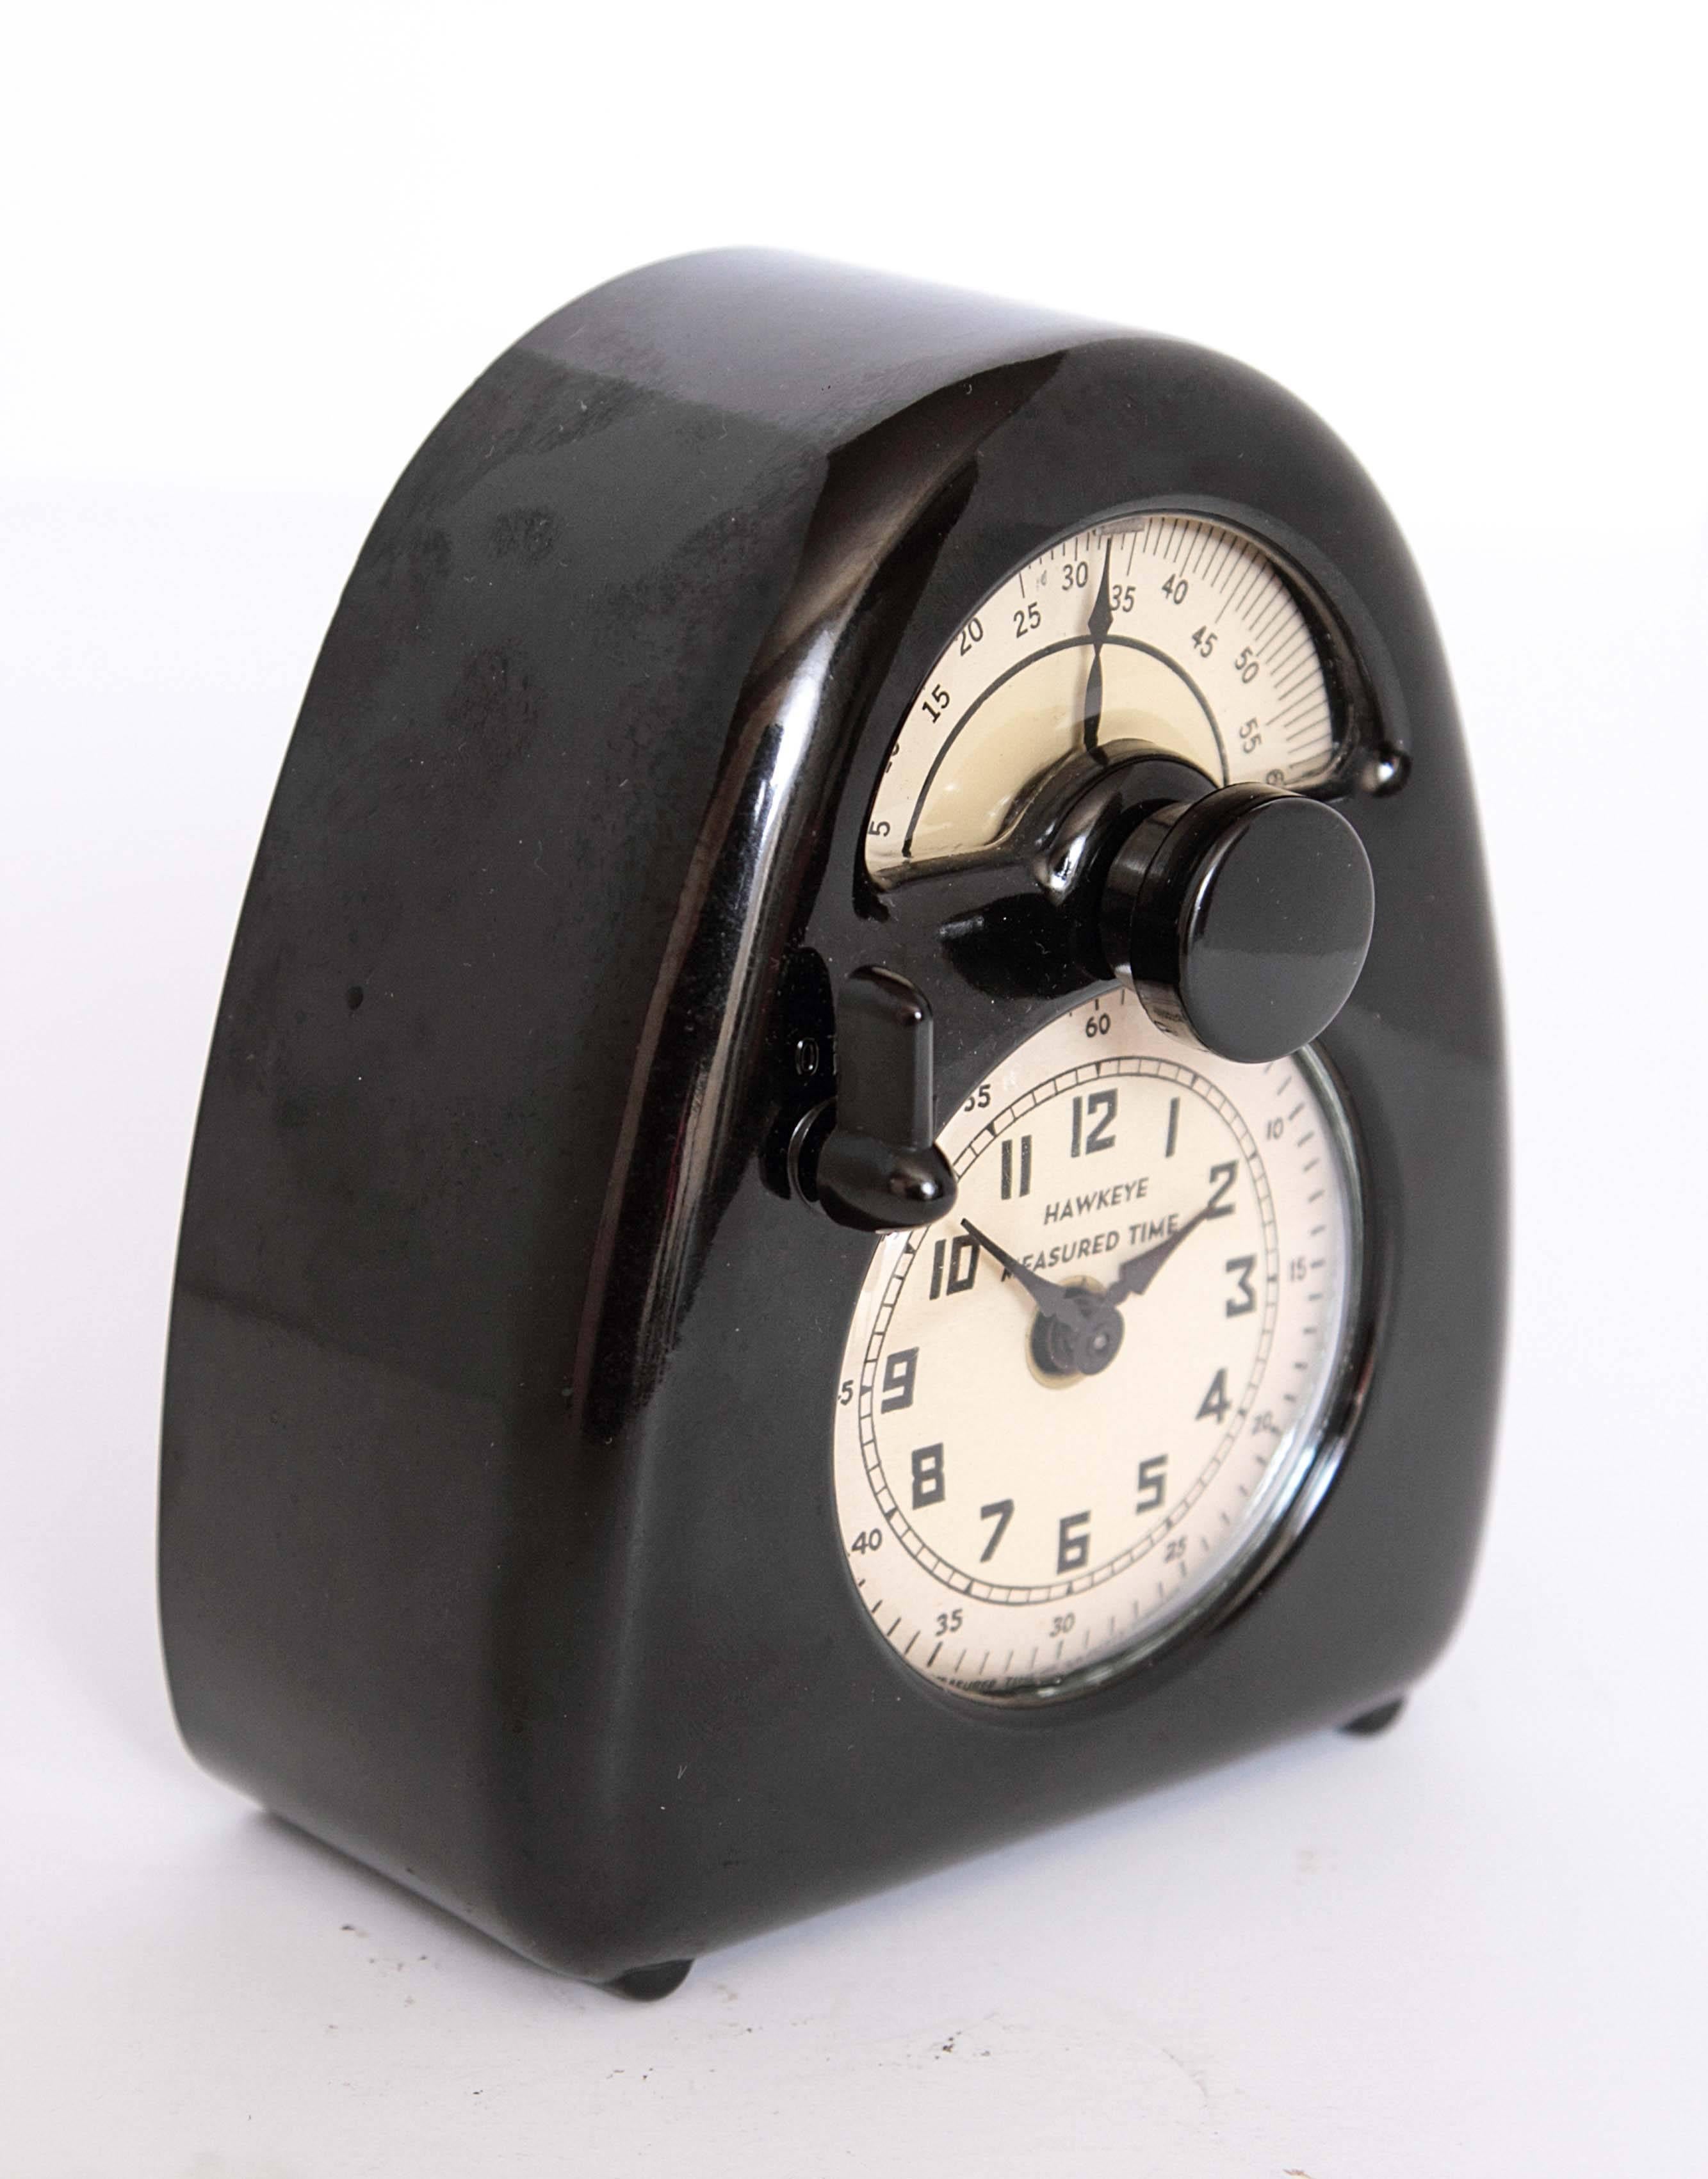 Isamu Noguchi Art Deco Bakelite Hawkeye Measured Time Clock / Timer

PRICE REDUCED

Essentially MINT example of this documented Art Deco Streamline Design ICON by Noguchi. An early Noguchi Industrial Design from 1932, pre-dating the iconic Radio